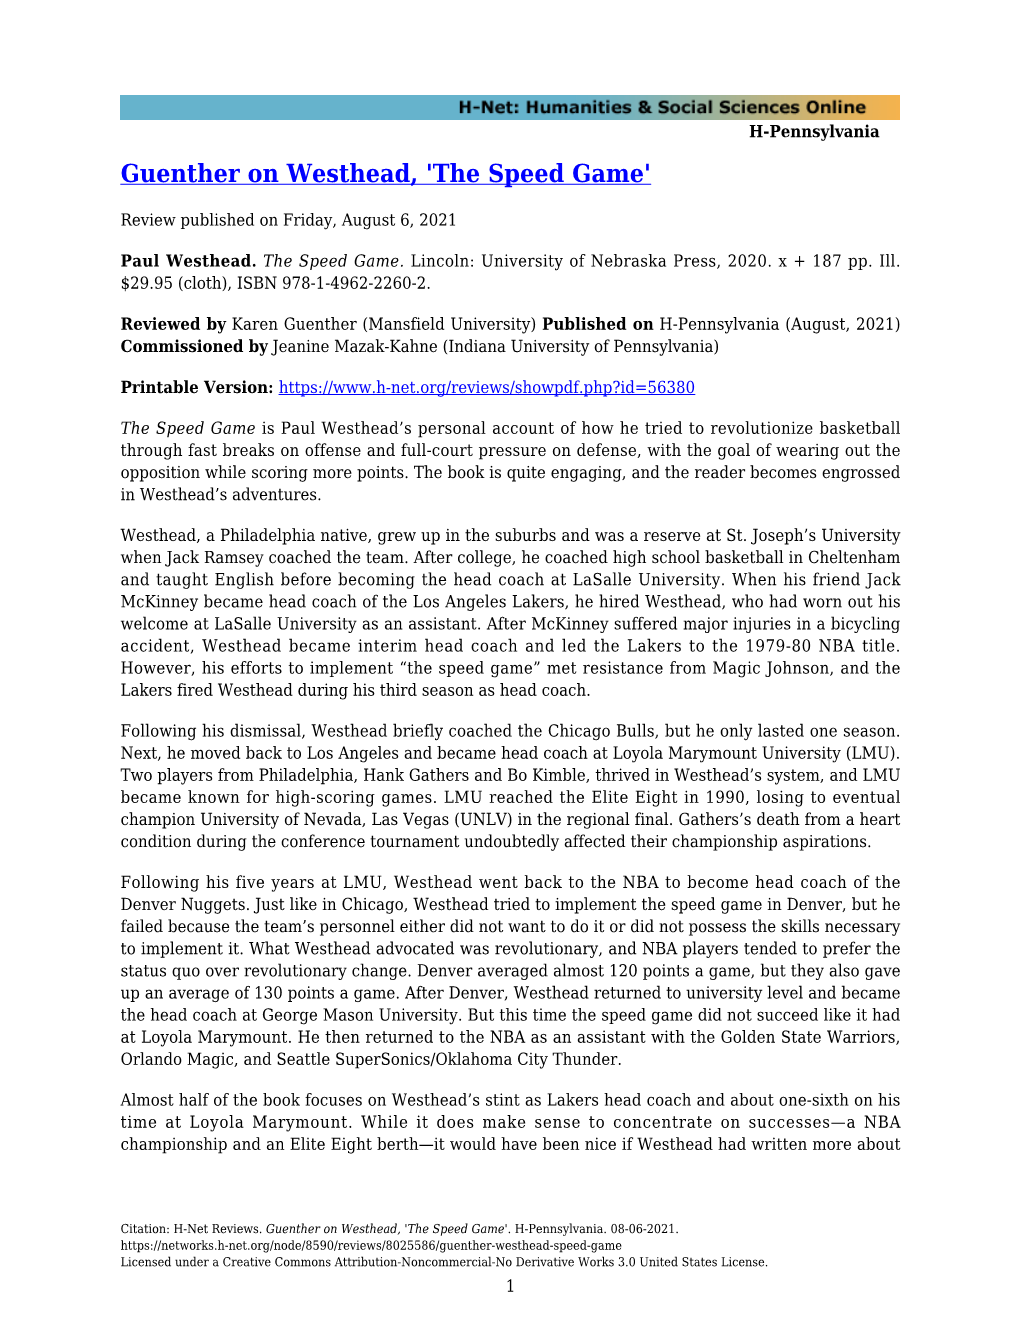 Guenther on Westhead, 'The Speed Game'